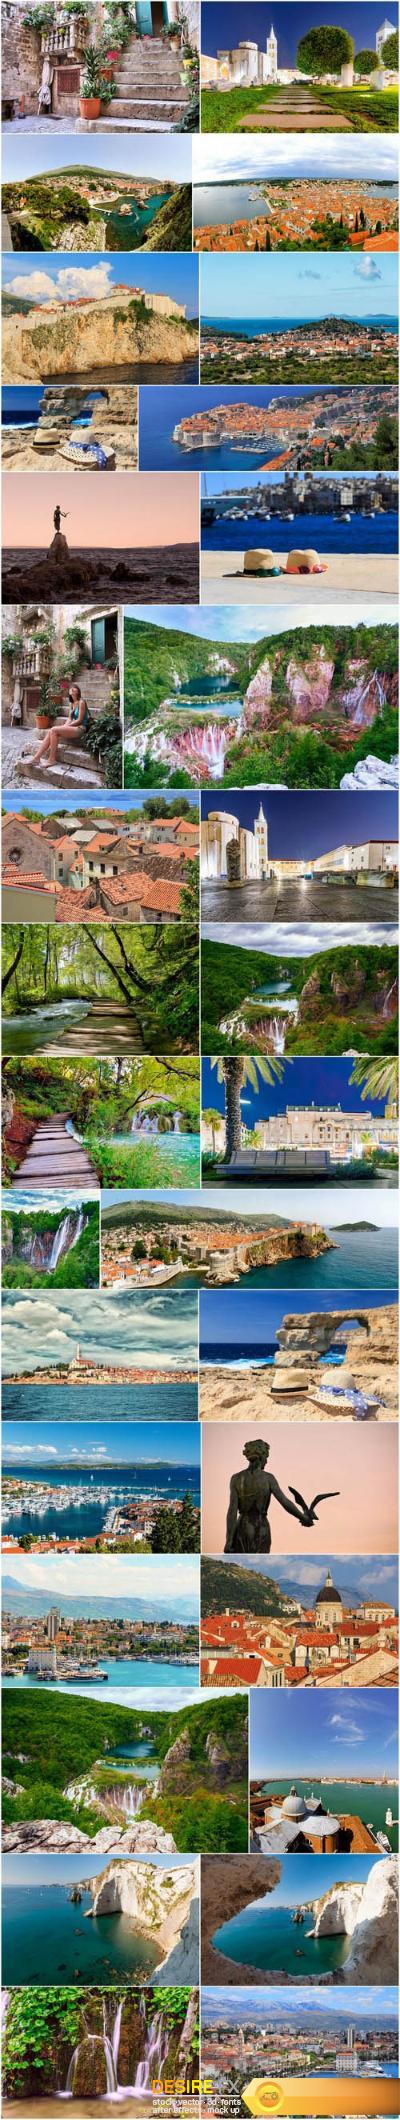 Vacation in Croatia 2 - Set of 32xUHQ JPEG Professional Stock Images